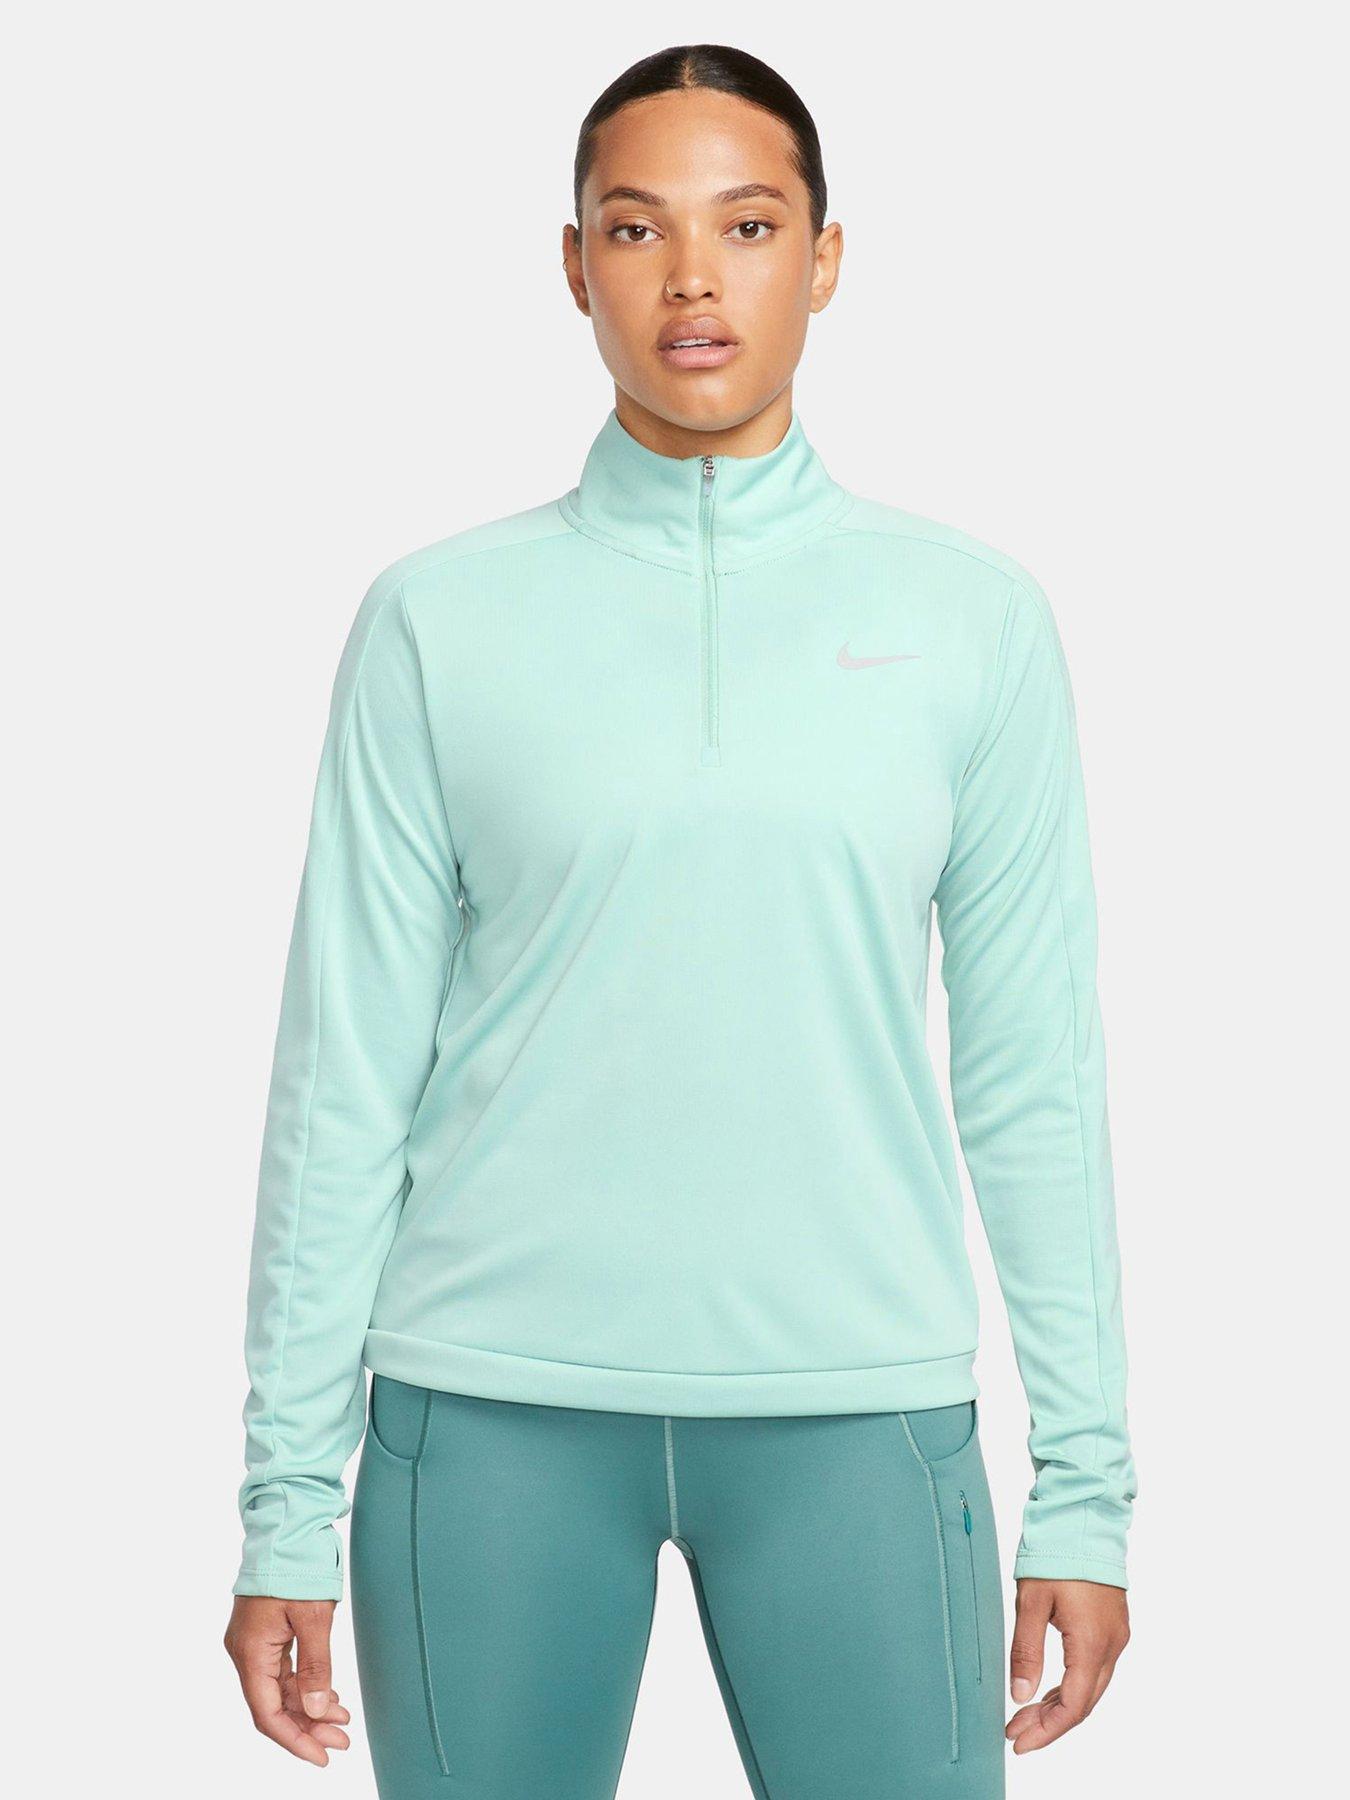 Nike Dri-FIT Pacer Women's 1/4-Zip Pullover Top - Blue